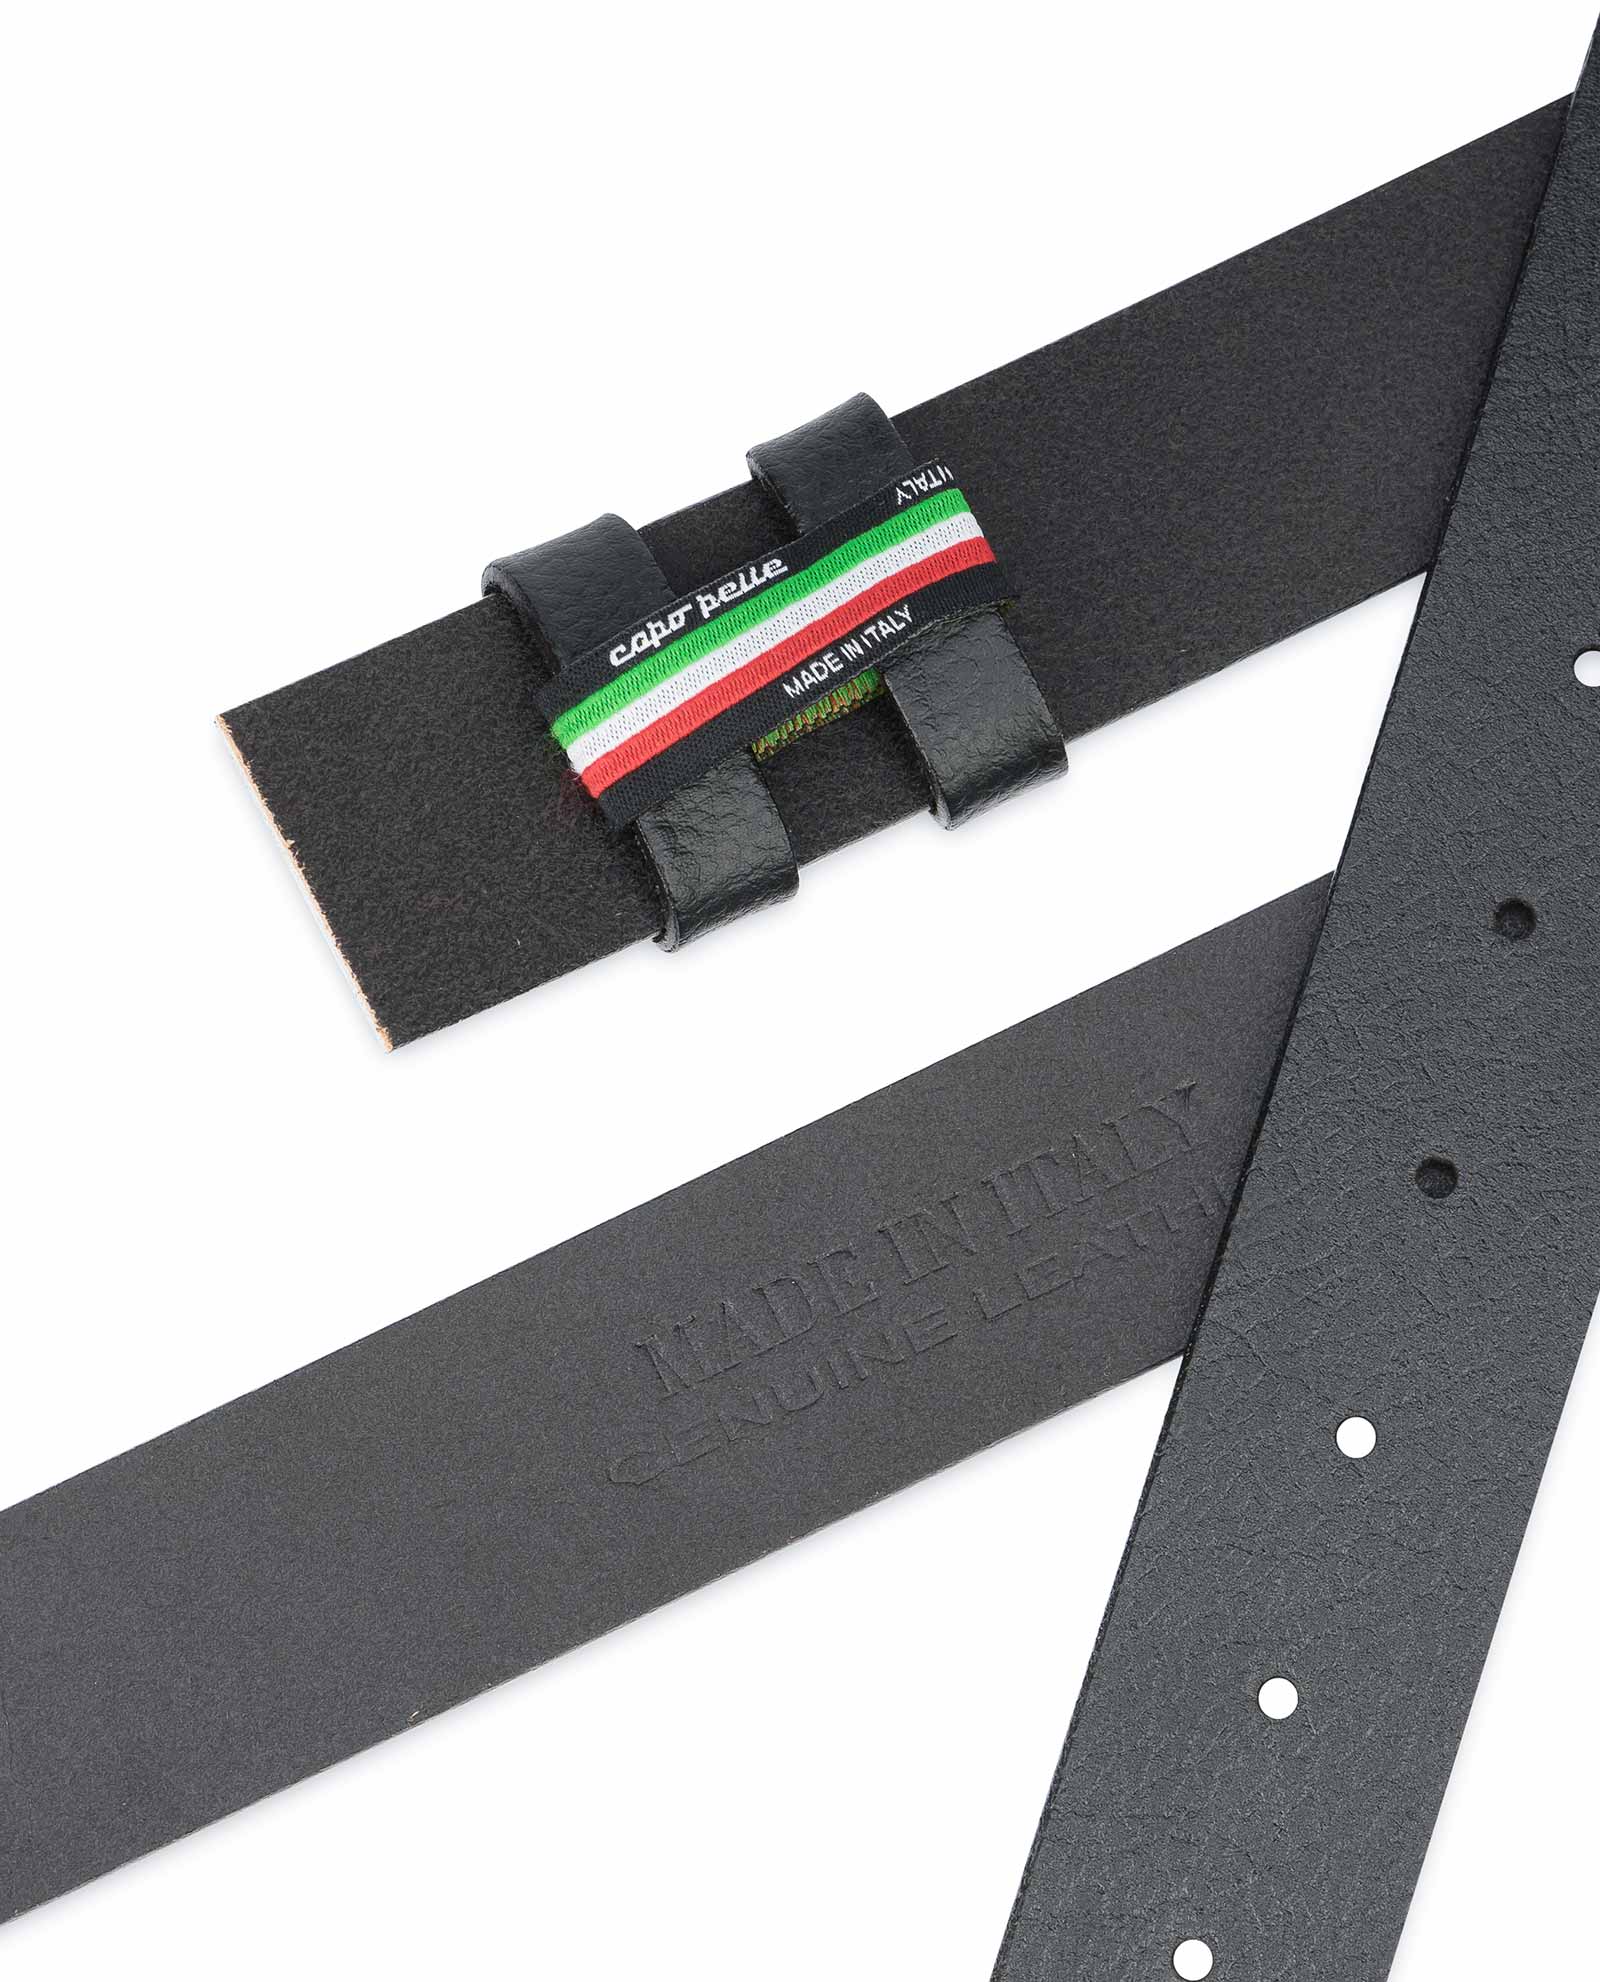 Replacement Genuine Leather Reversible Belt Strap Without Buckle 1-1/8 Wide